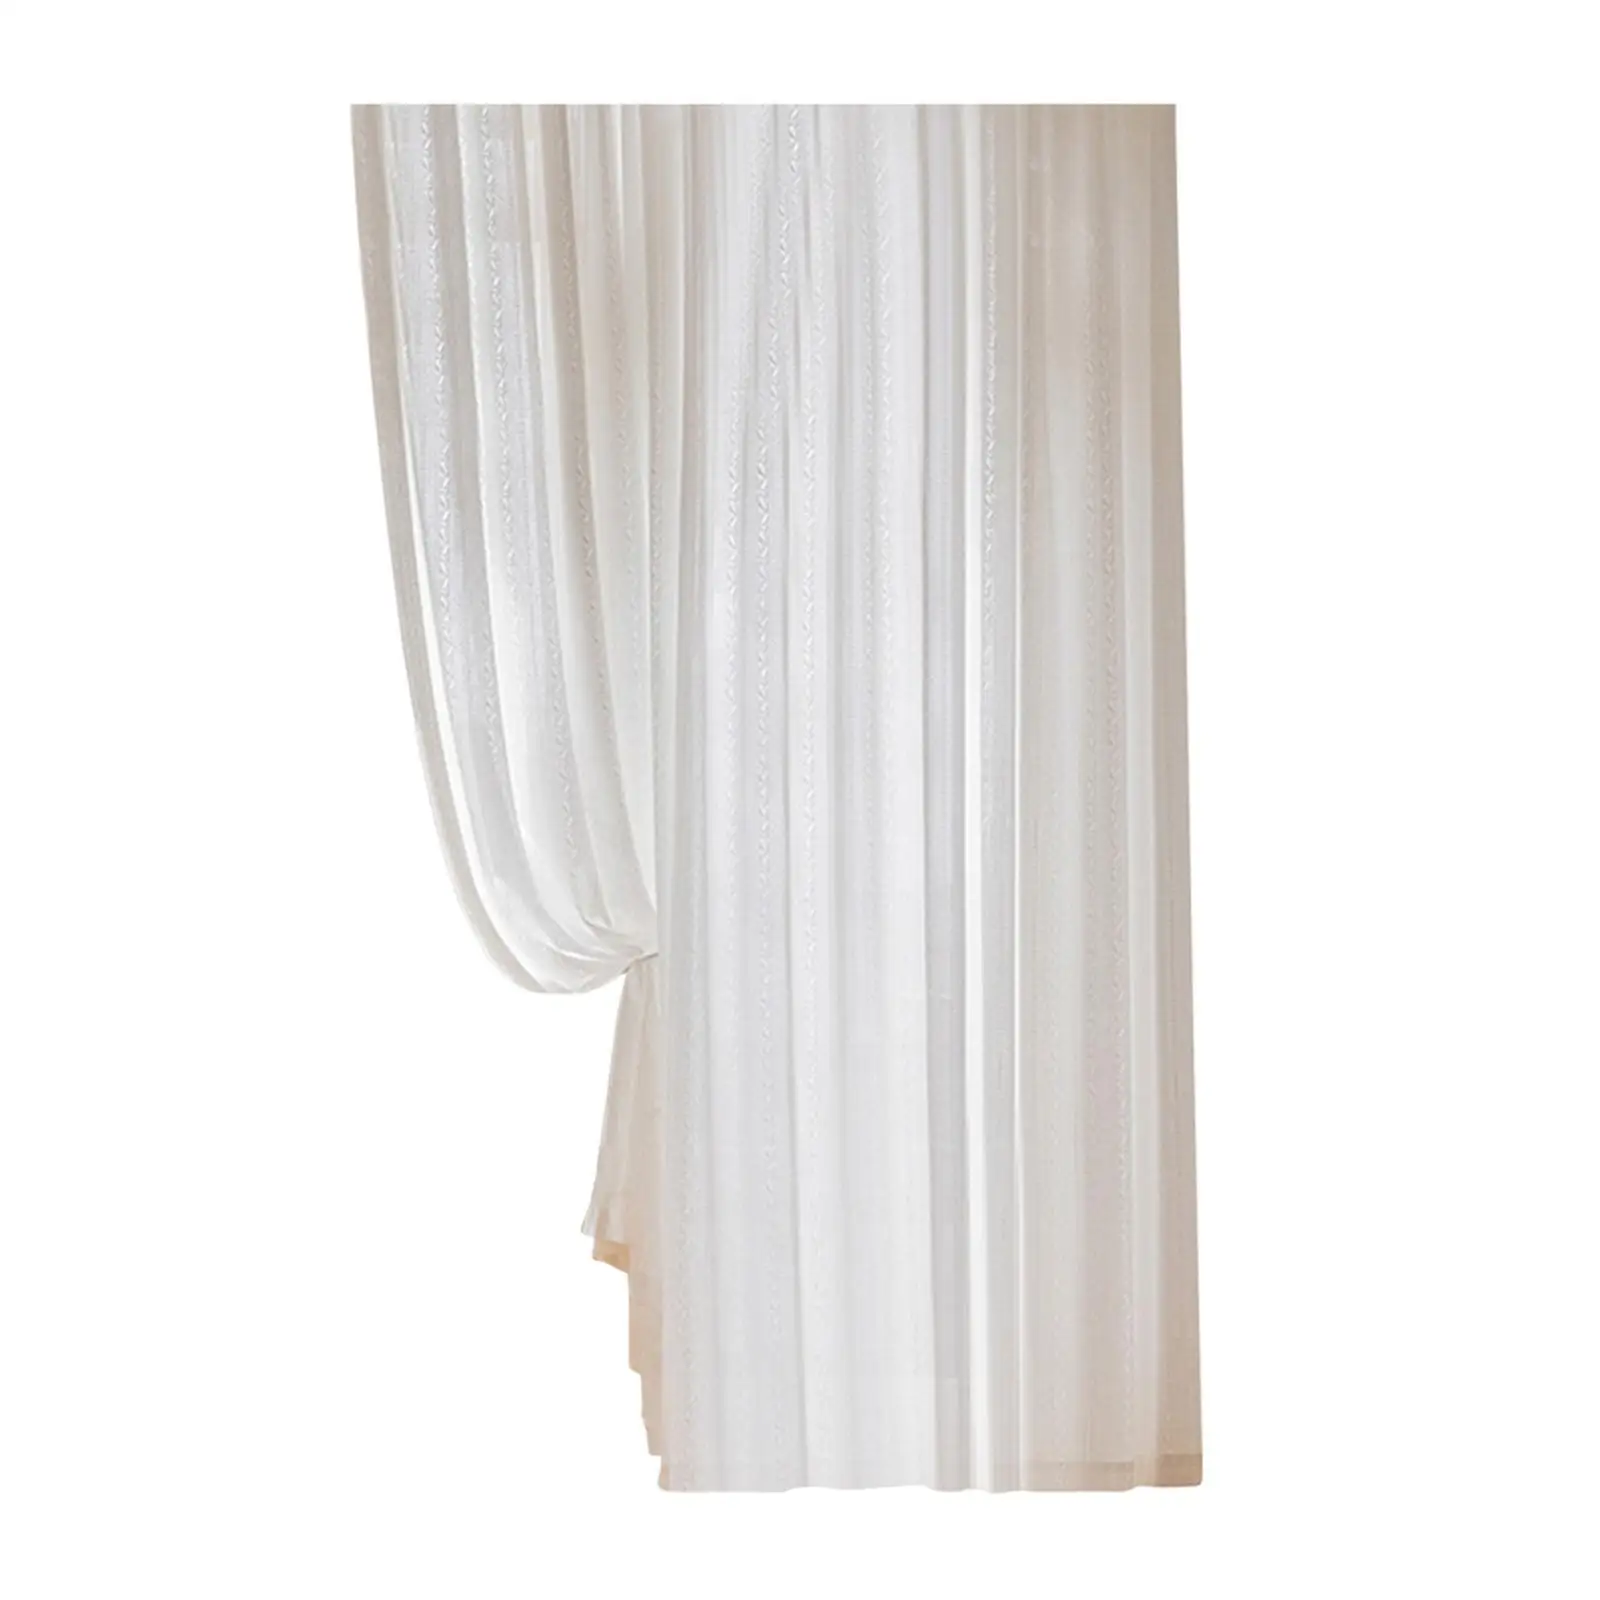 Window Curtains Door Curtain Rustic Drapes European Style Lightweight for Dining Room Restaurant Bedroom Living Room Decoration